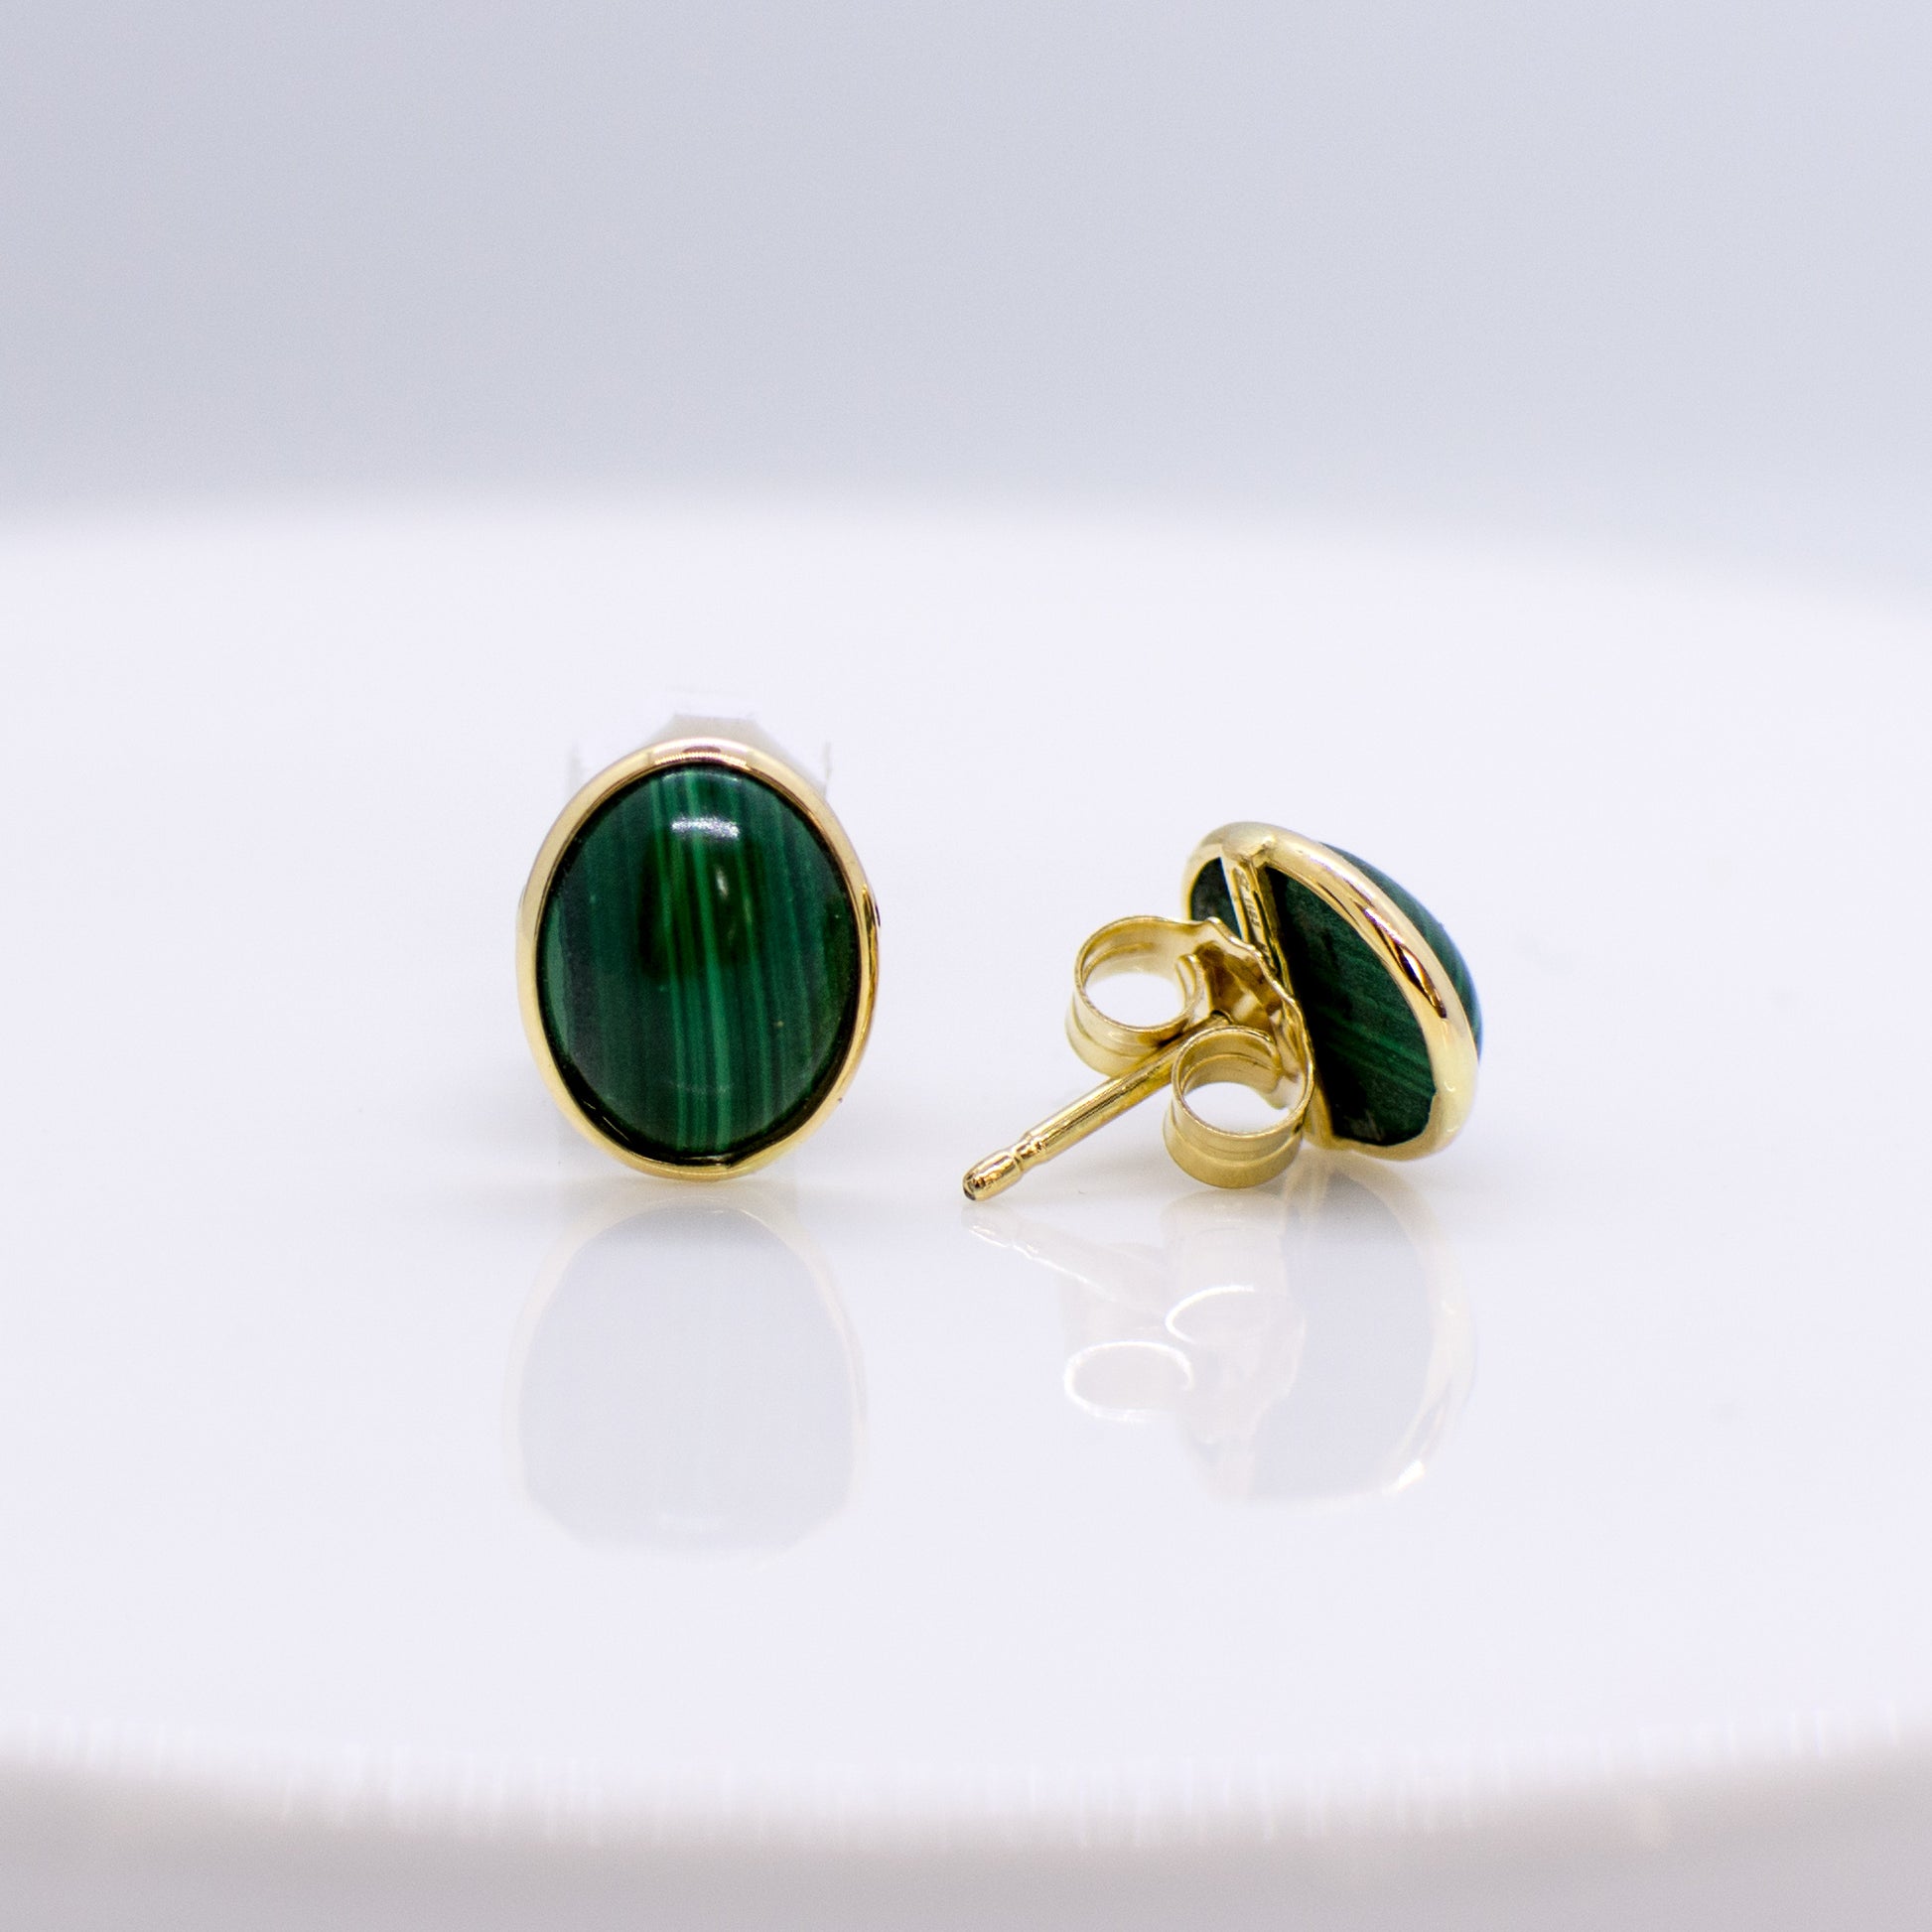 10mm x 8mm Malachite 18ct yellow gold Glowing combinations of cultured pearls, natural stones and gold are the focus of our Natural Beauty collection.  These exquisite materials have natural imperfections that delight with their uniqueness. Each item from this collection is handmade and one off.  We can provide the same designs in a range of colours and alloys.  The product shown is the one that you would buy.  Natural materials like turquoise and cultured pearls have unique colour variations.